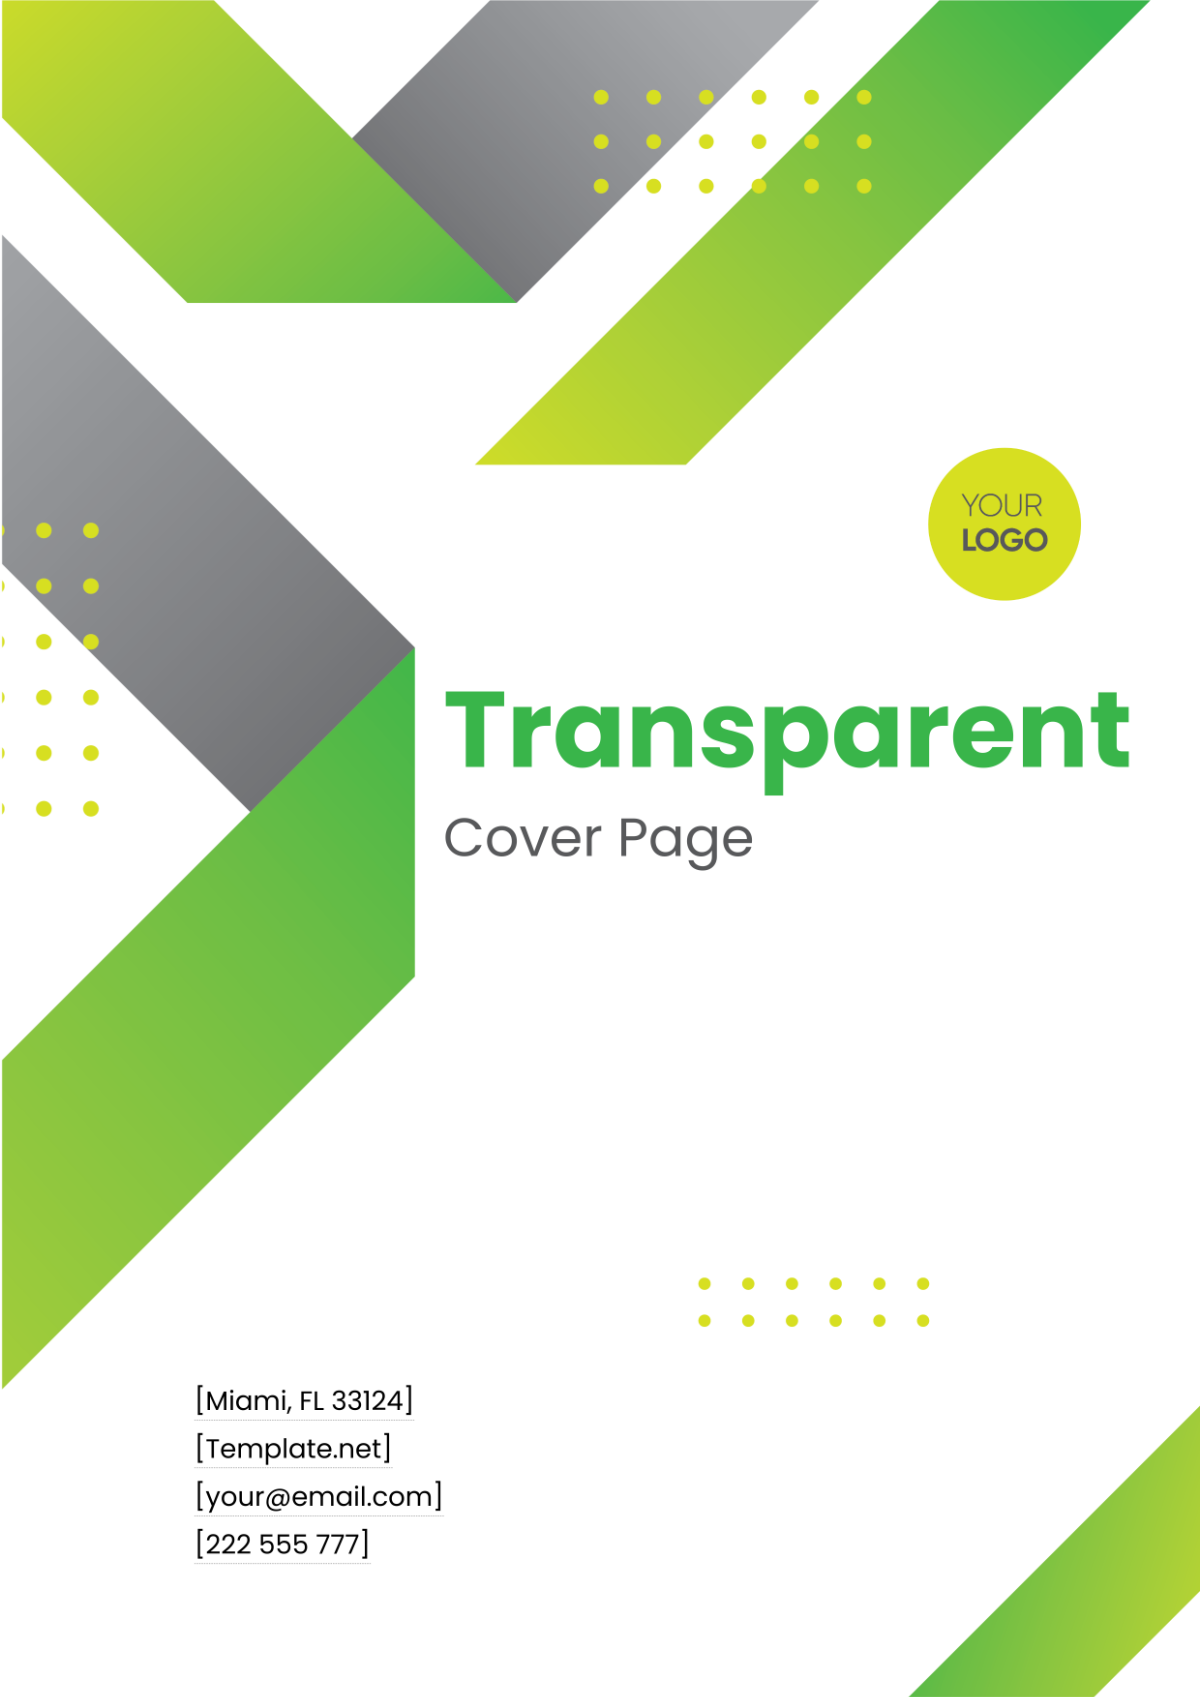 Transparent Cover Page Logo Template